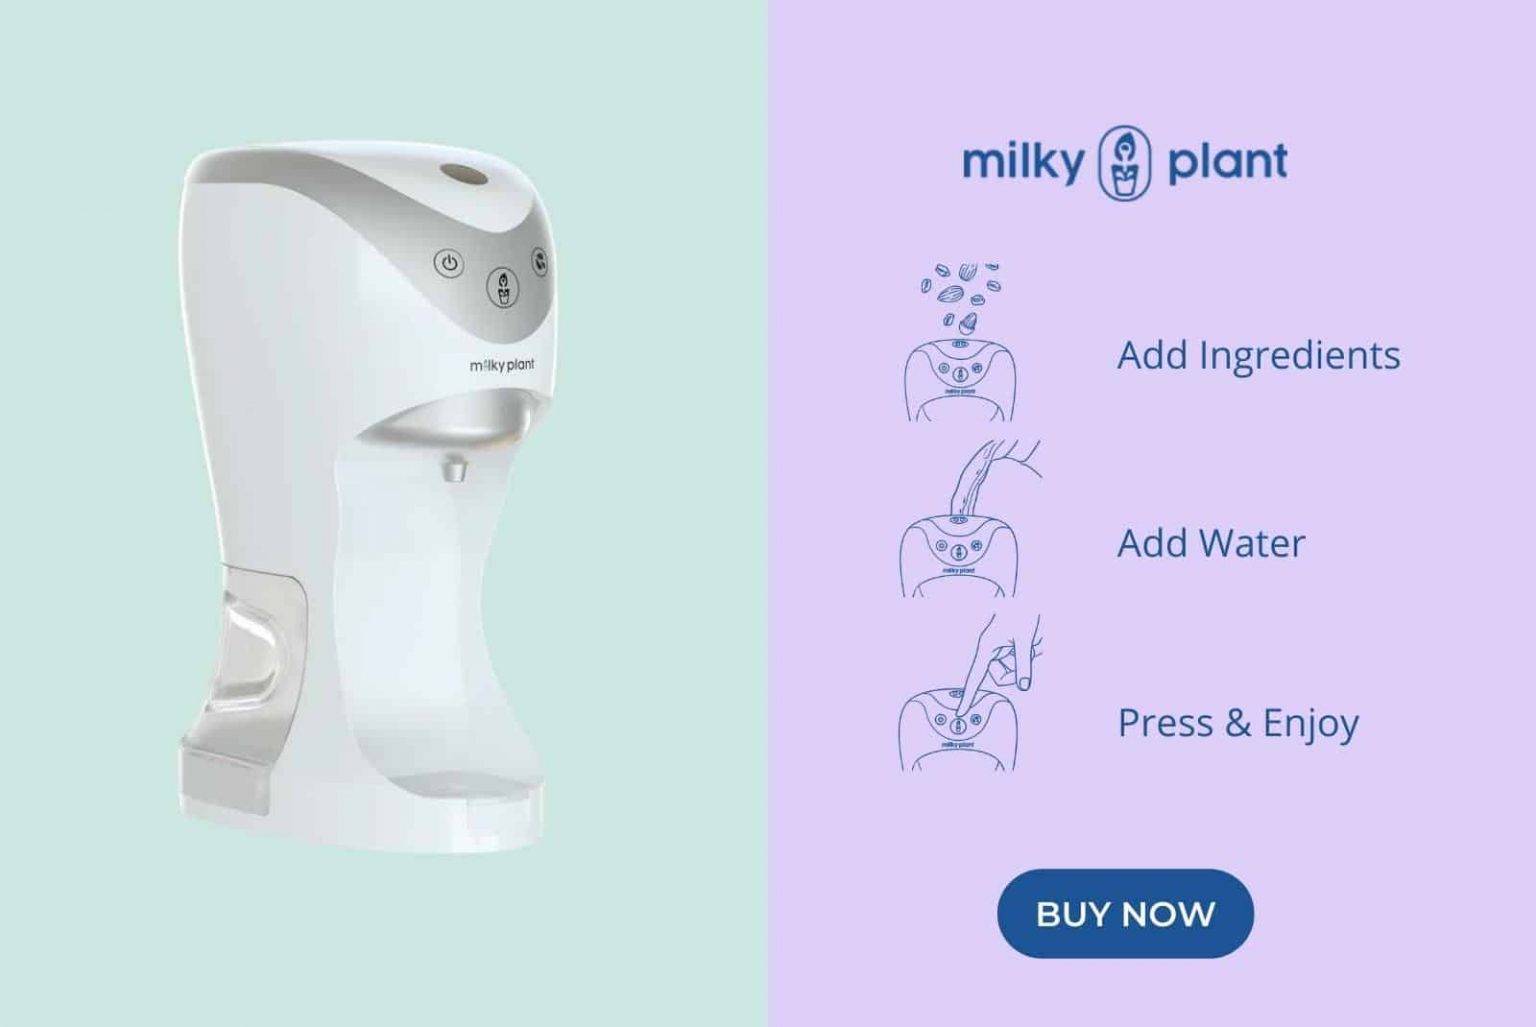 The milky plant makes fresh, nutritious plant milk in 3 minutes. No mess. No fuss.